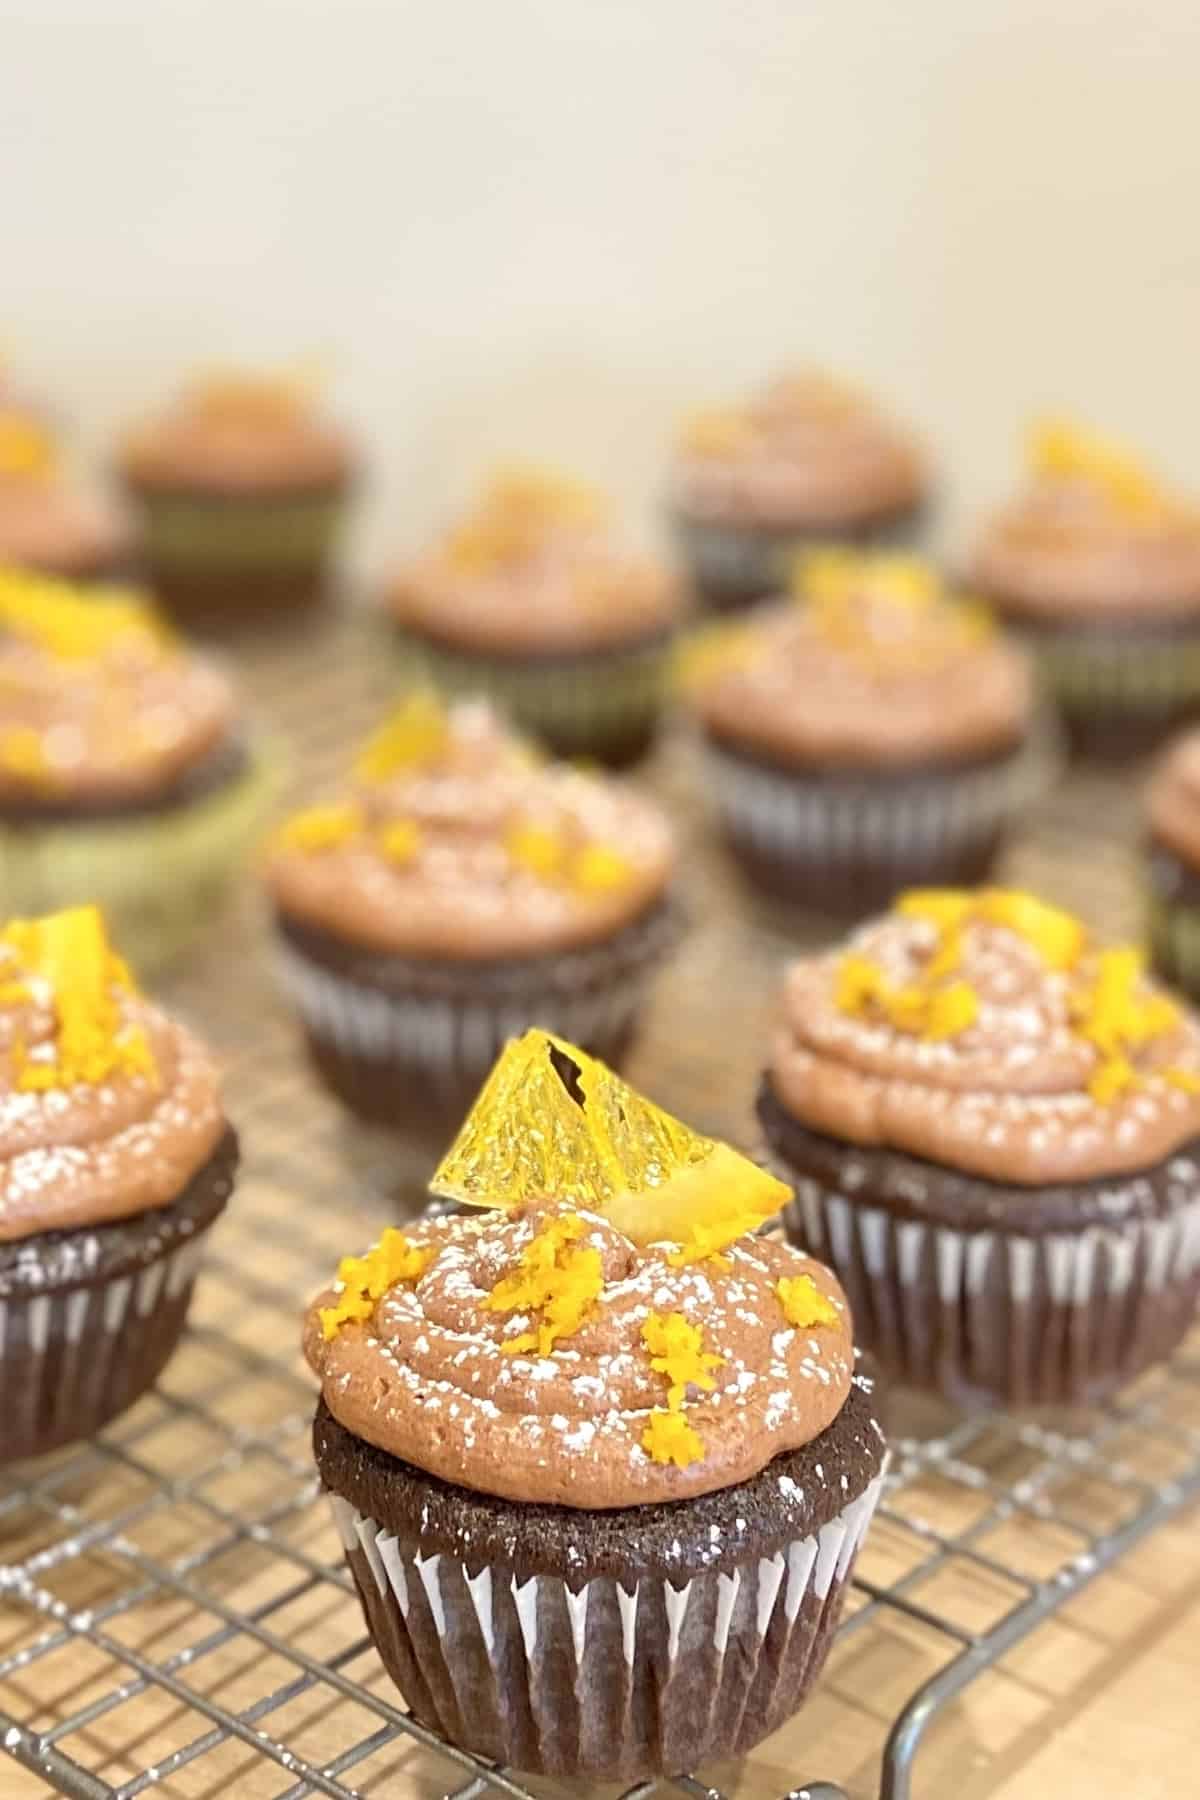 Cupcakes with a tiny wedge of candied orange on top.